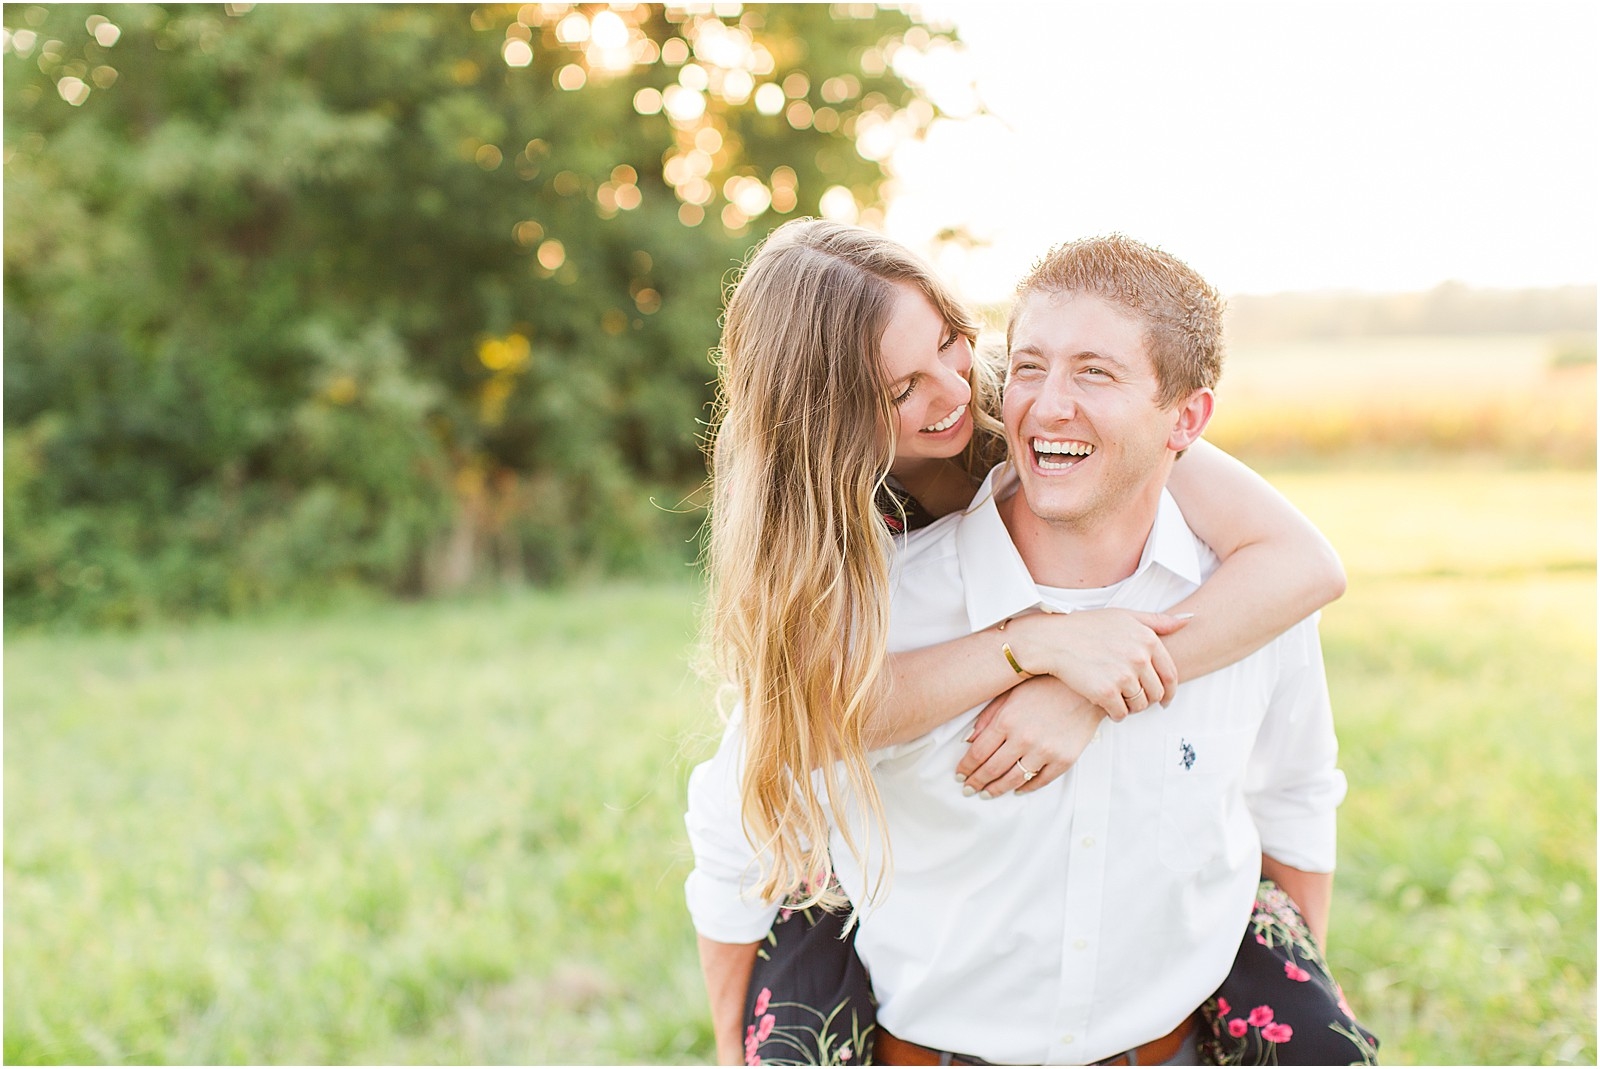 A Jasper Indiana Engagement Session | Tori and Kyle | Bret and Brandie Photography037.jpg